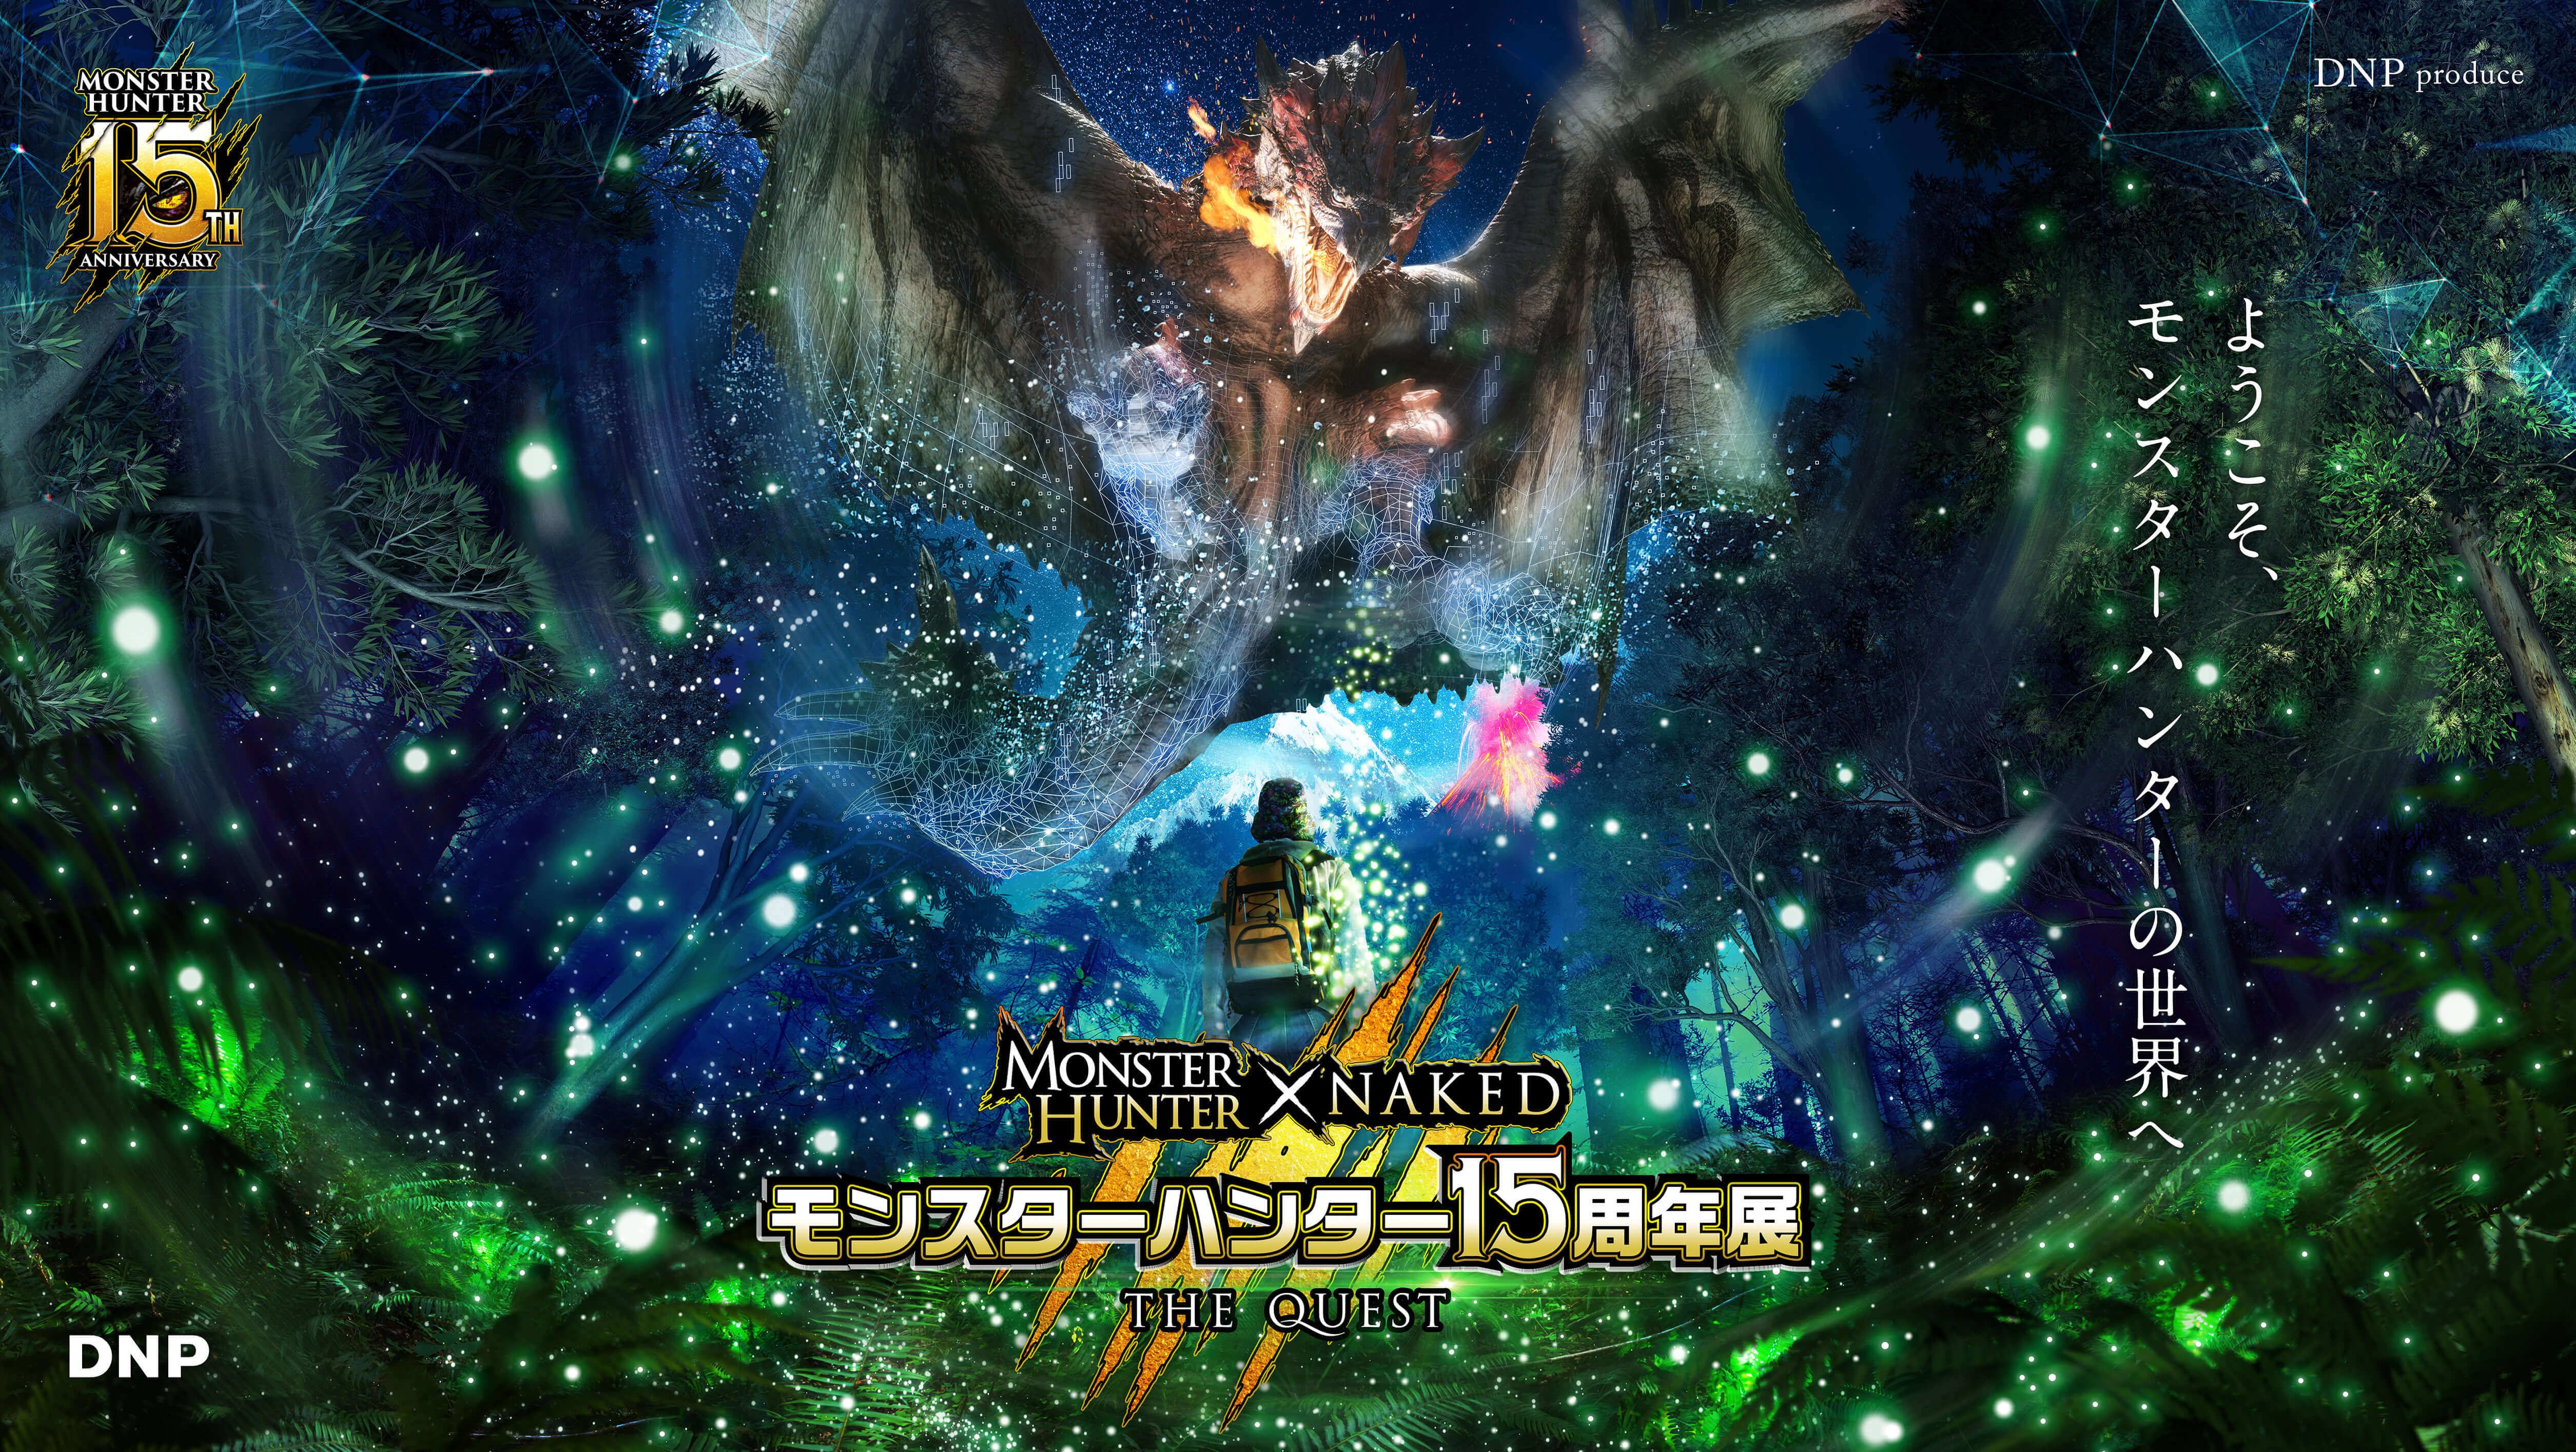 The World Of Monster Hunter To Be Recreated In Real Life To Celebrate 15th Anniversary Moshi Moshi Nippon もしもしにっぽん